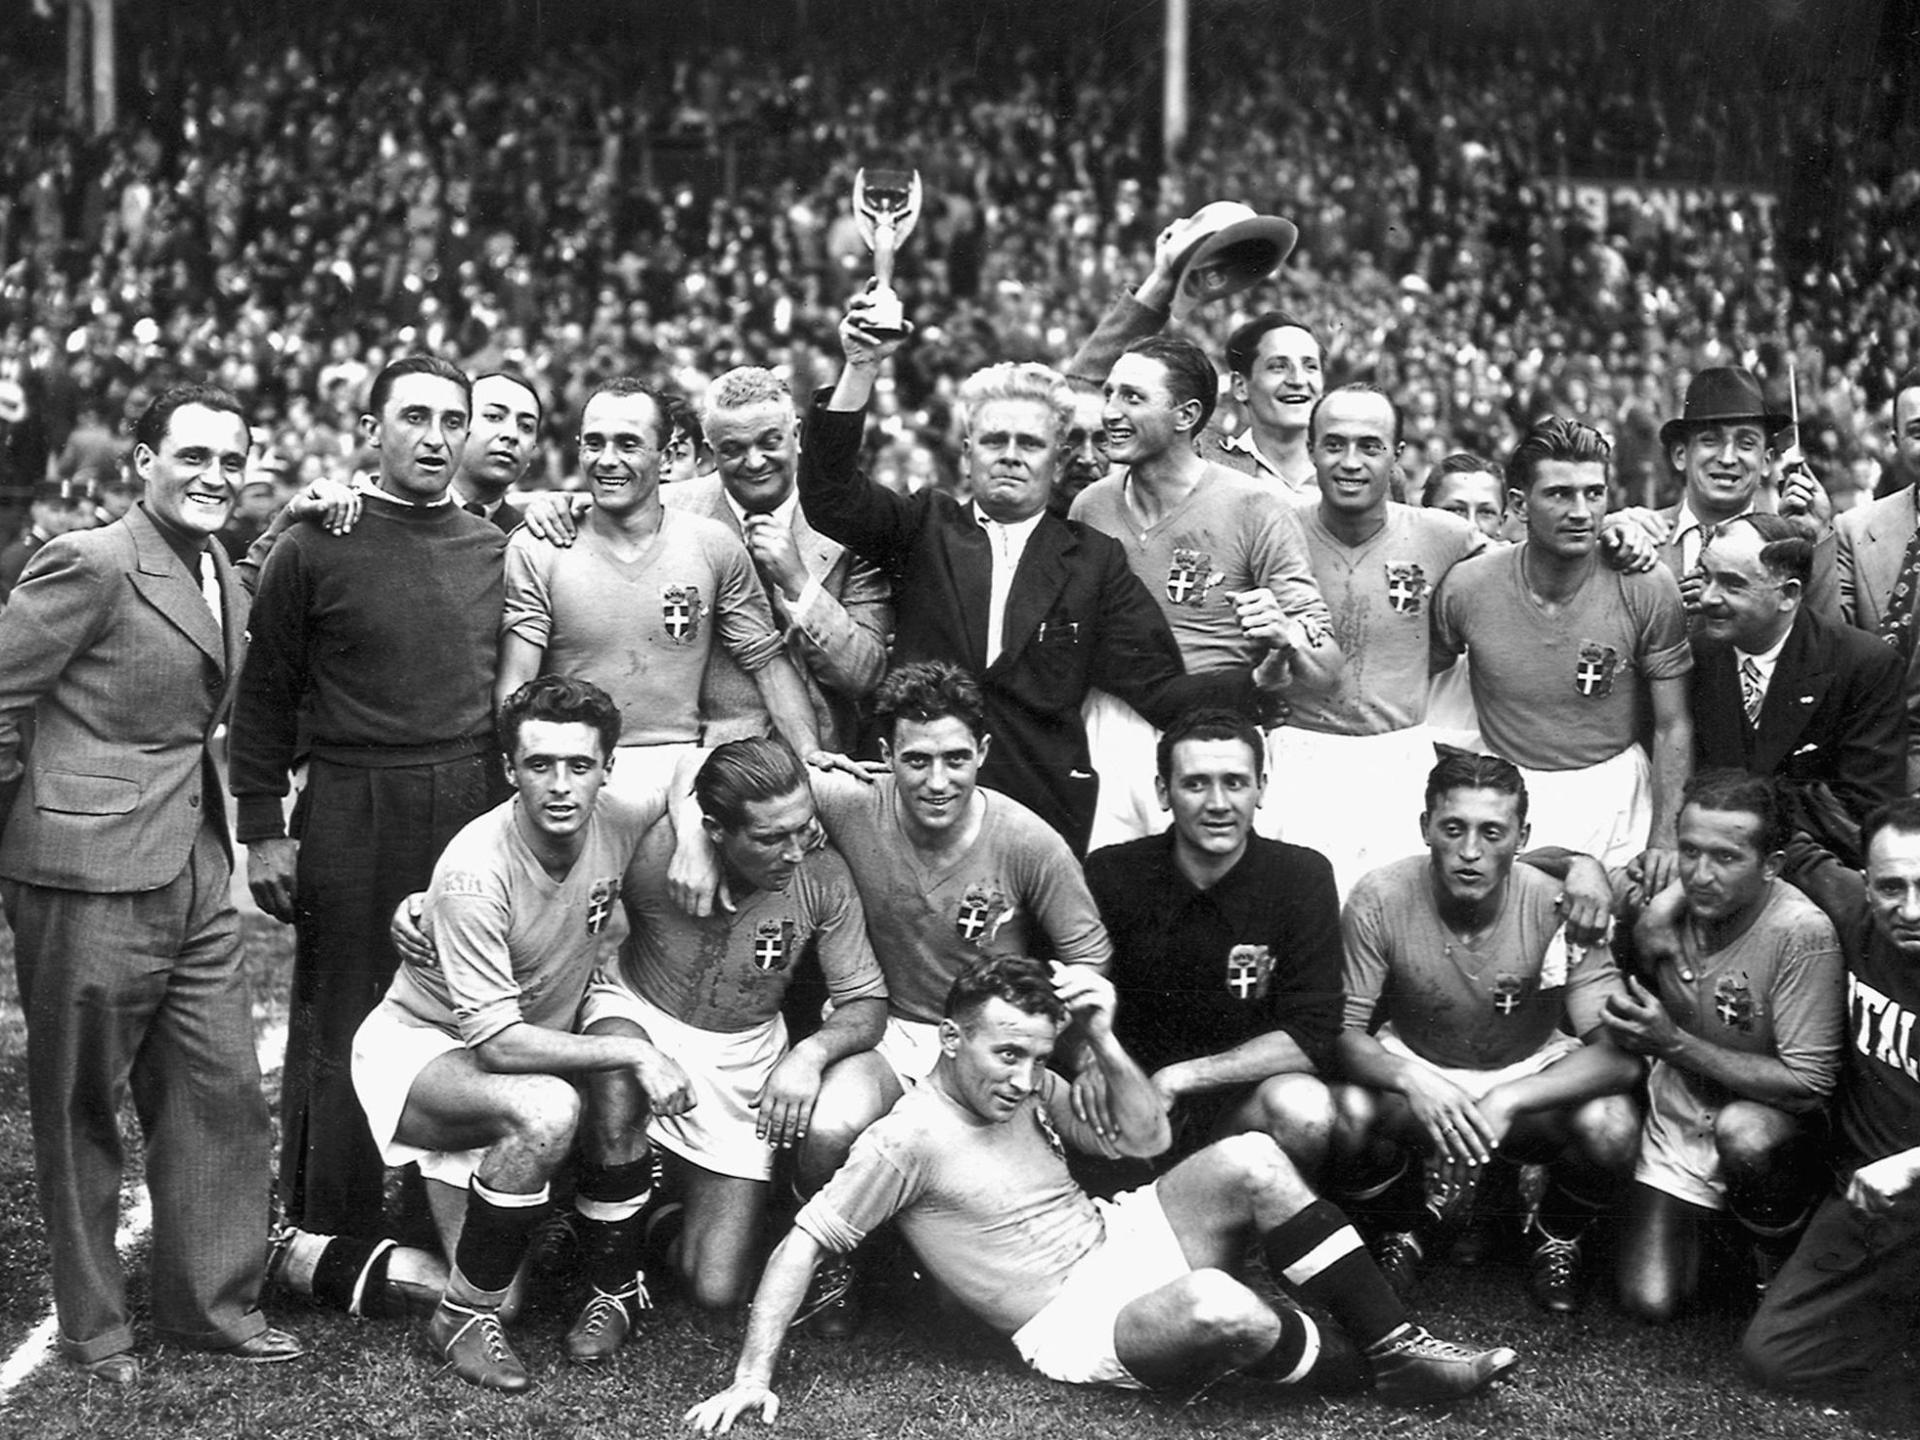 FIFA World Cup 1938: Italy defend title before WWII breaks out